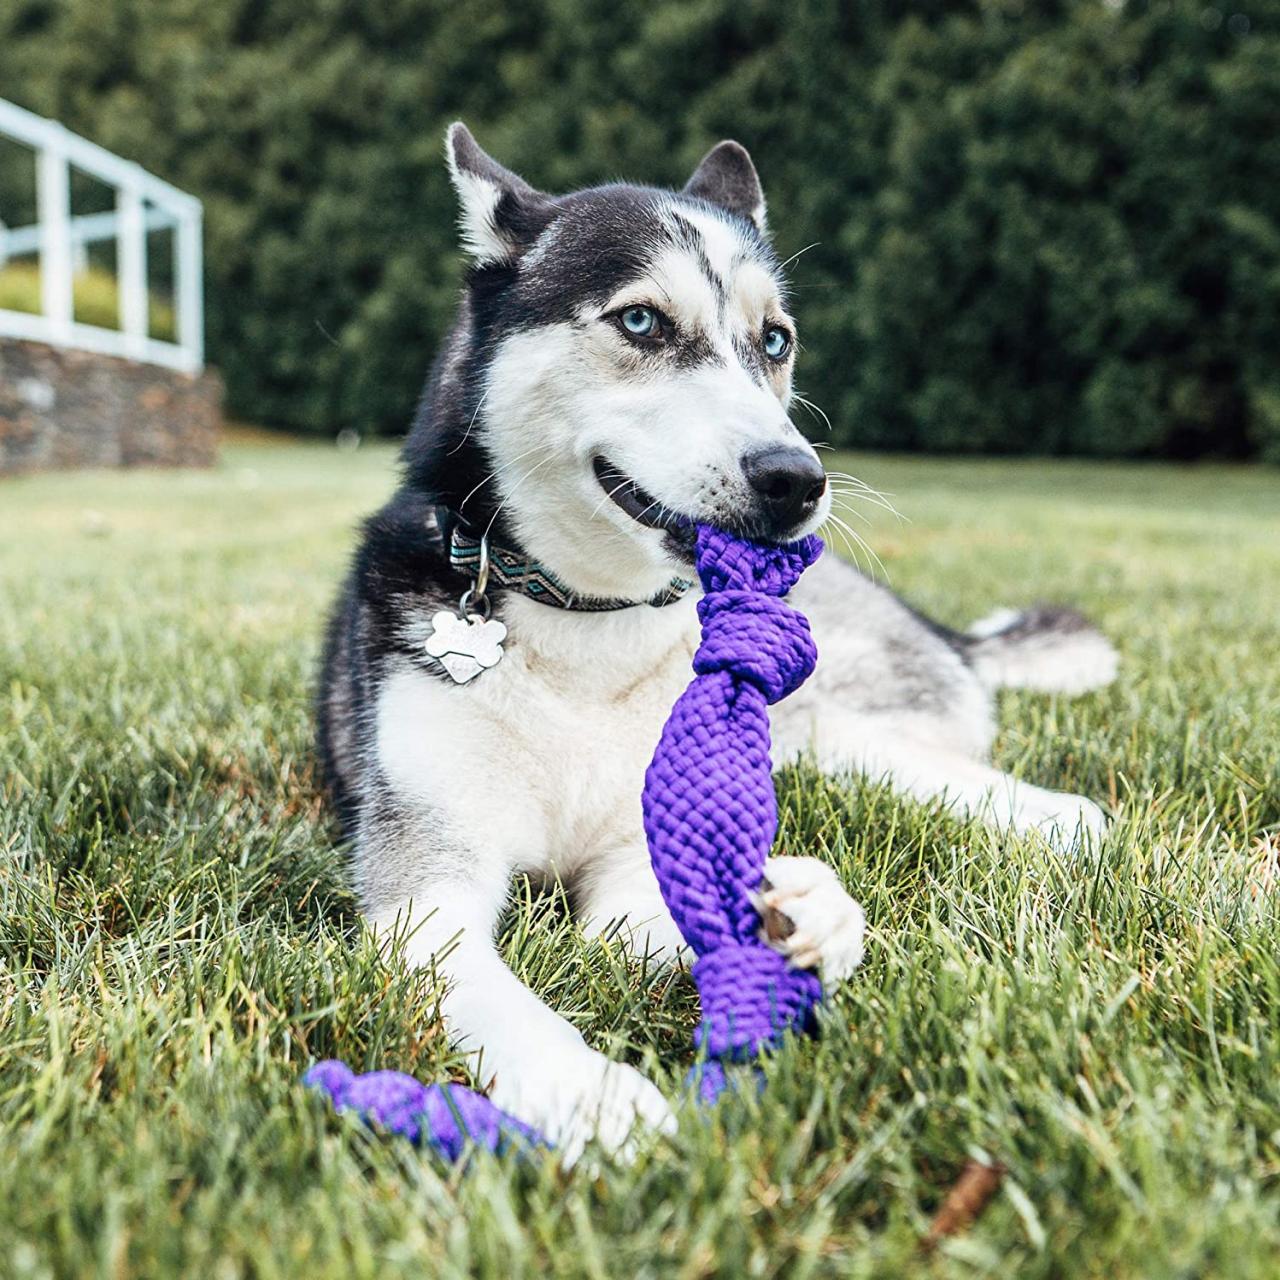 Play with high-quality dog chew toys, stylishly designed